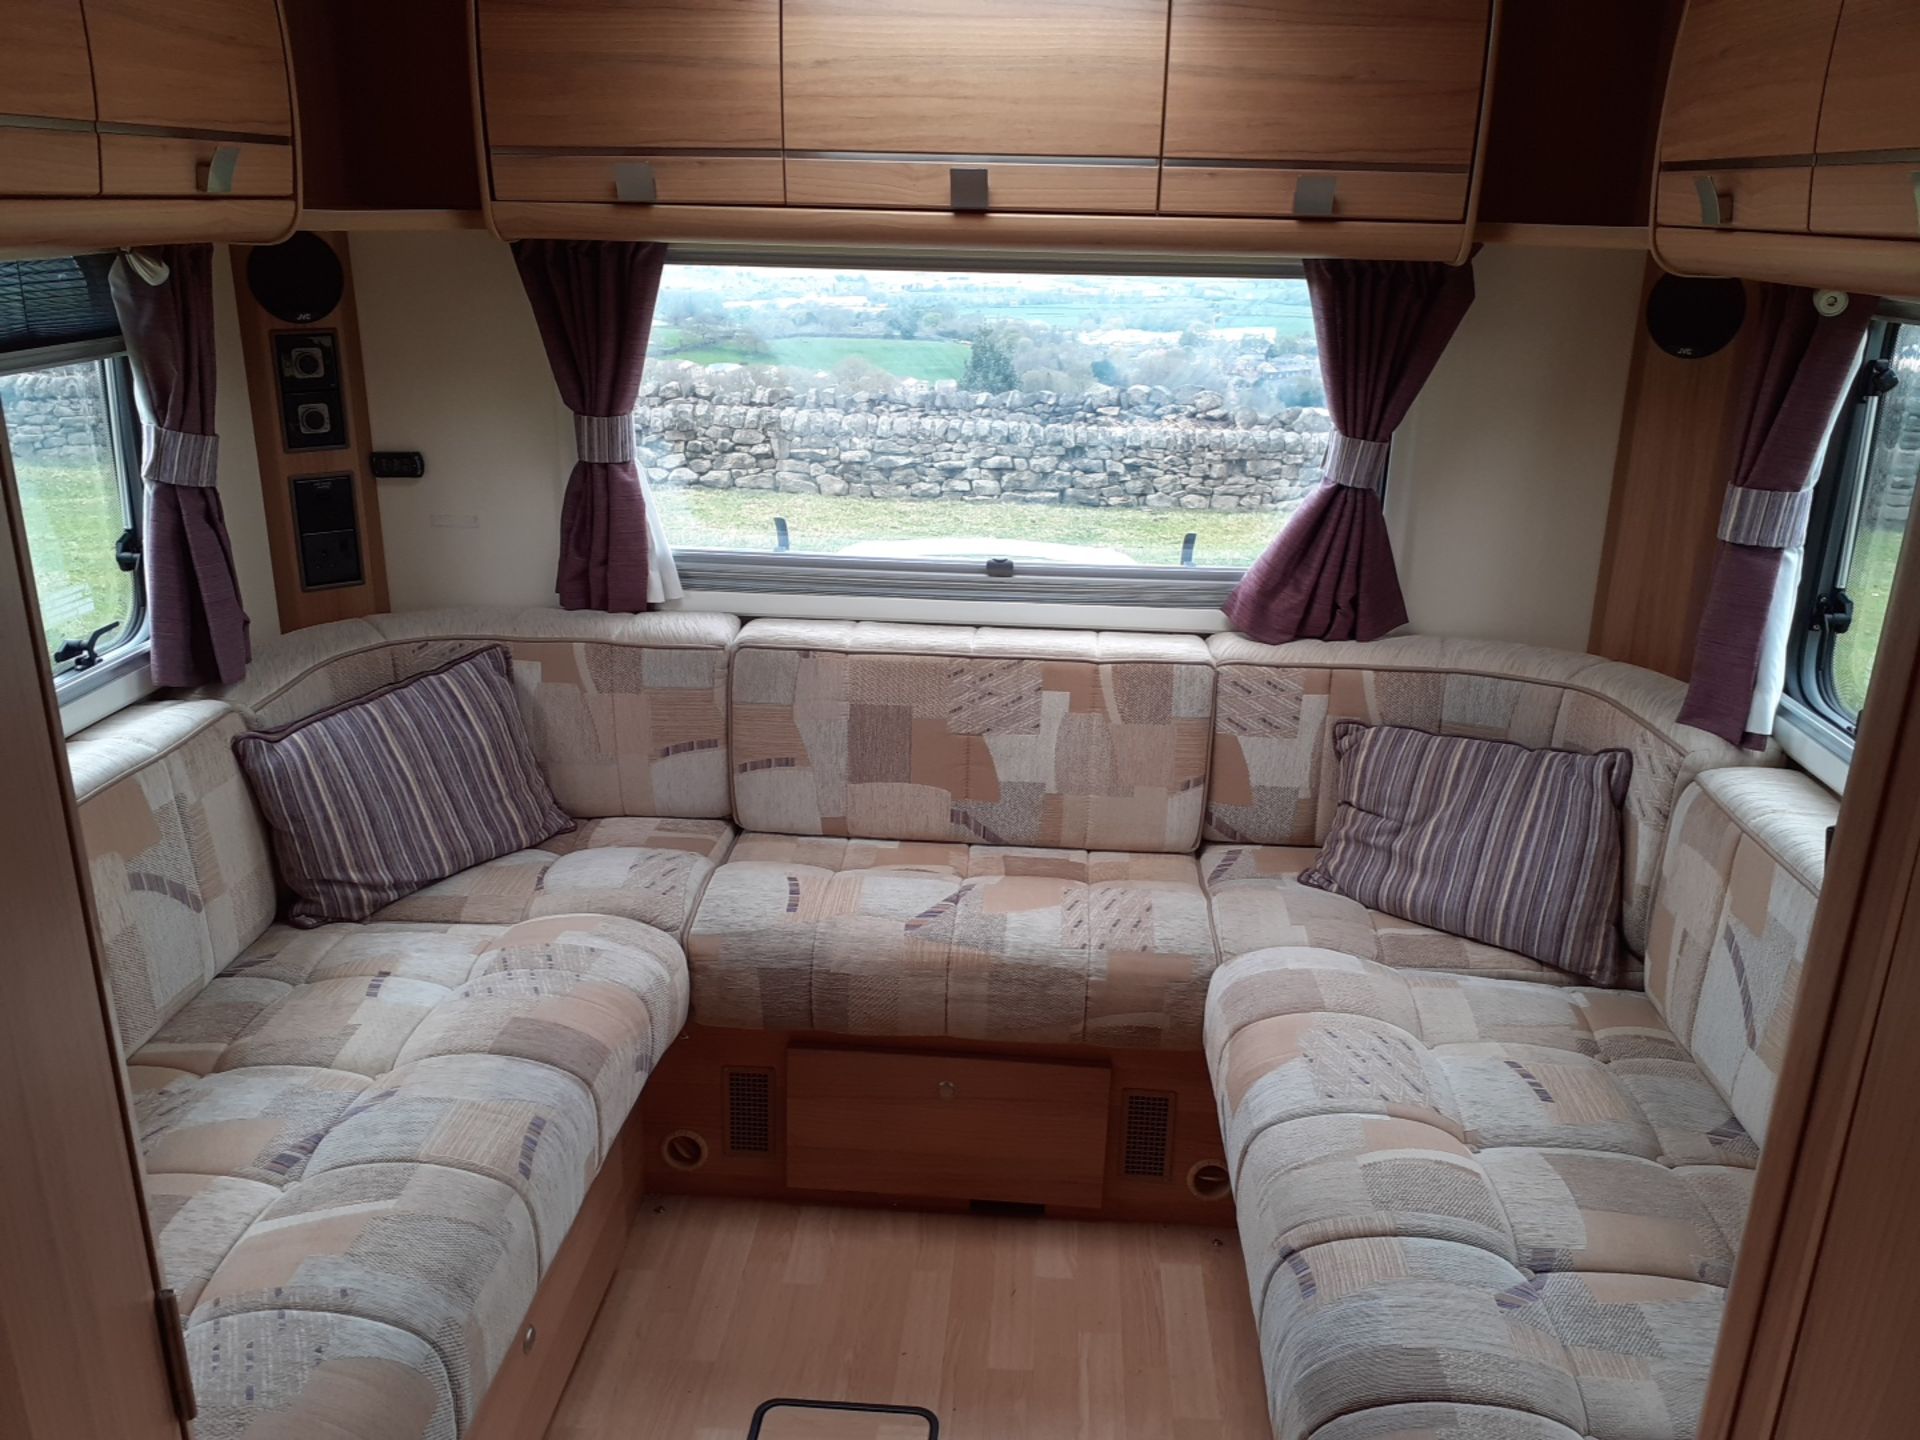 2012 BAILEY APPROACH 760 SE LUXURY 6 BERTH MOTORHOME £10K OF EXTRAS, 30,000 MILES FROM NEW - Image 14 of 31